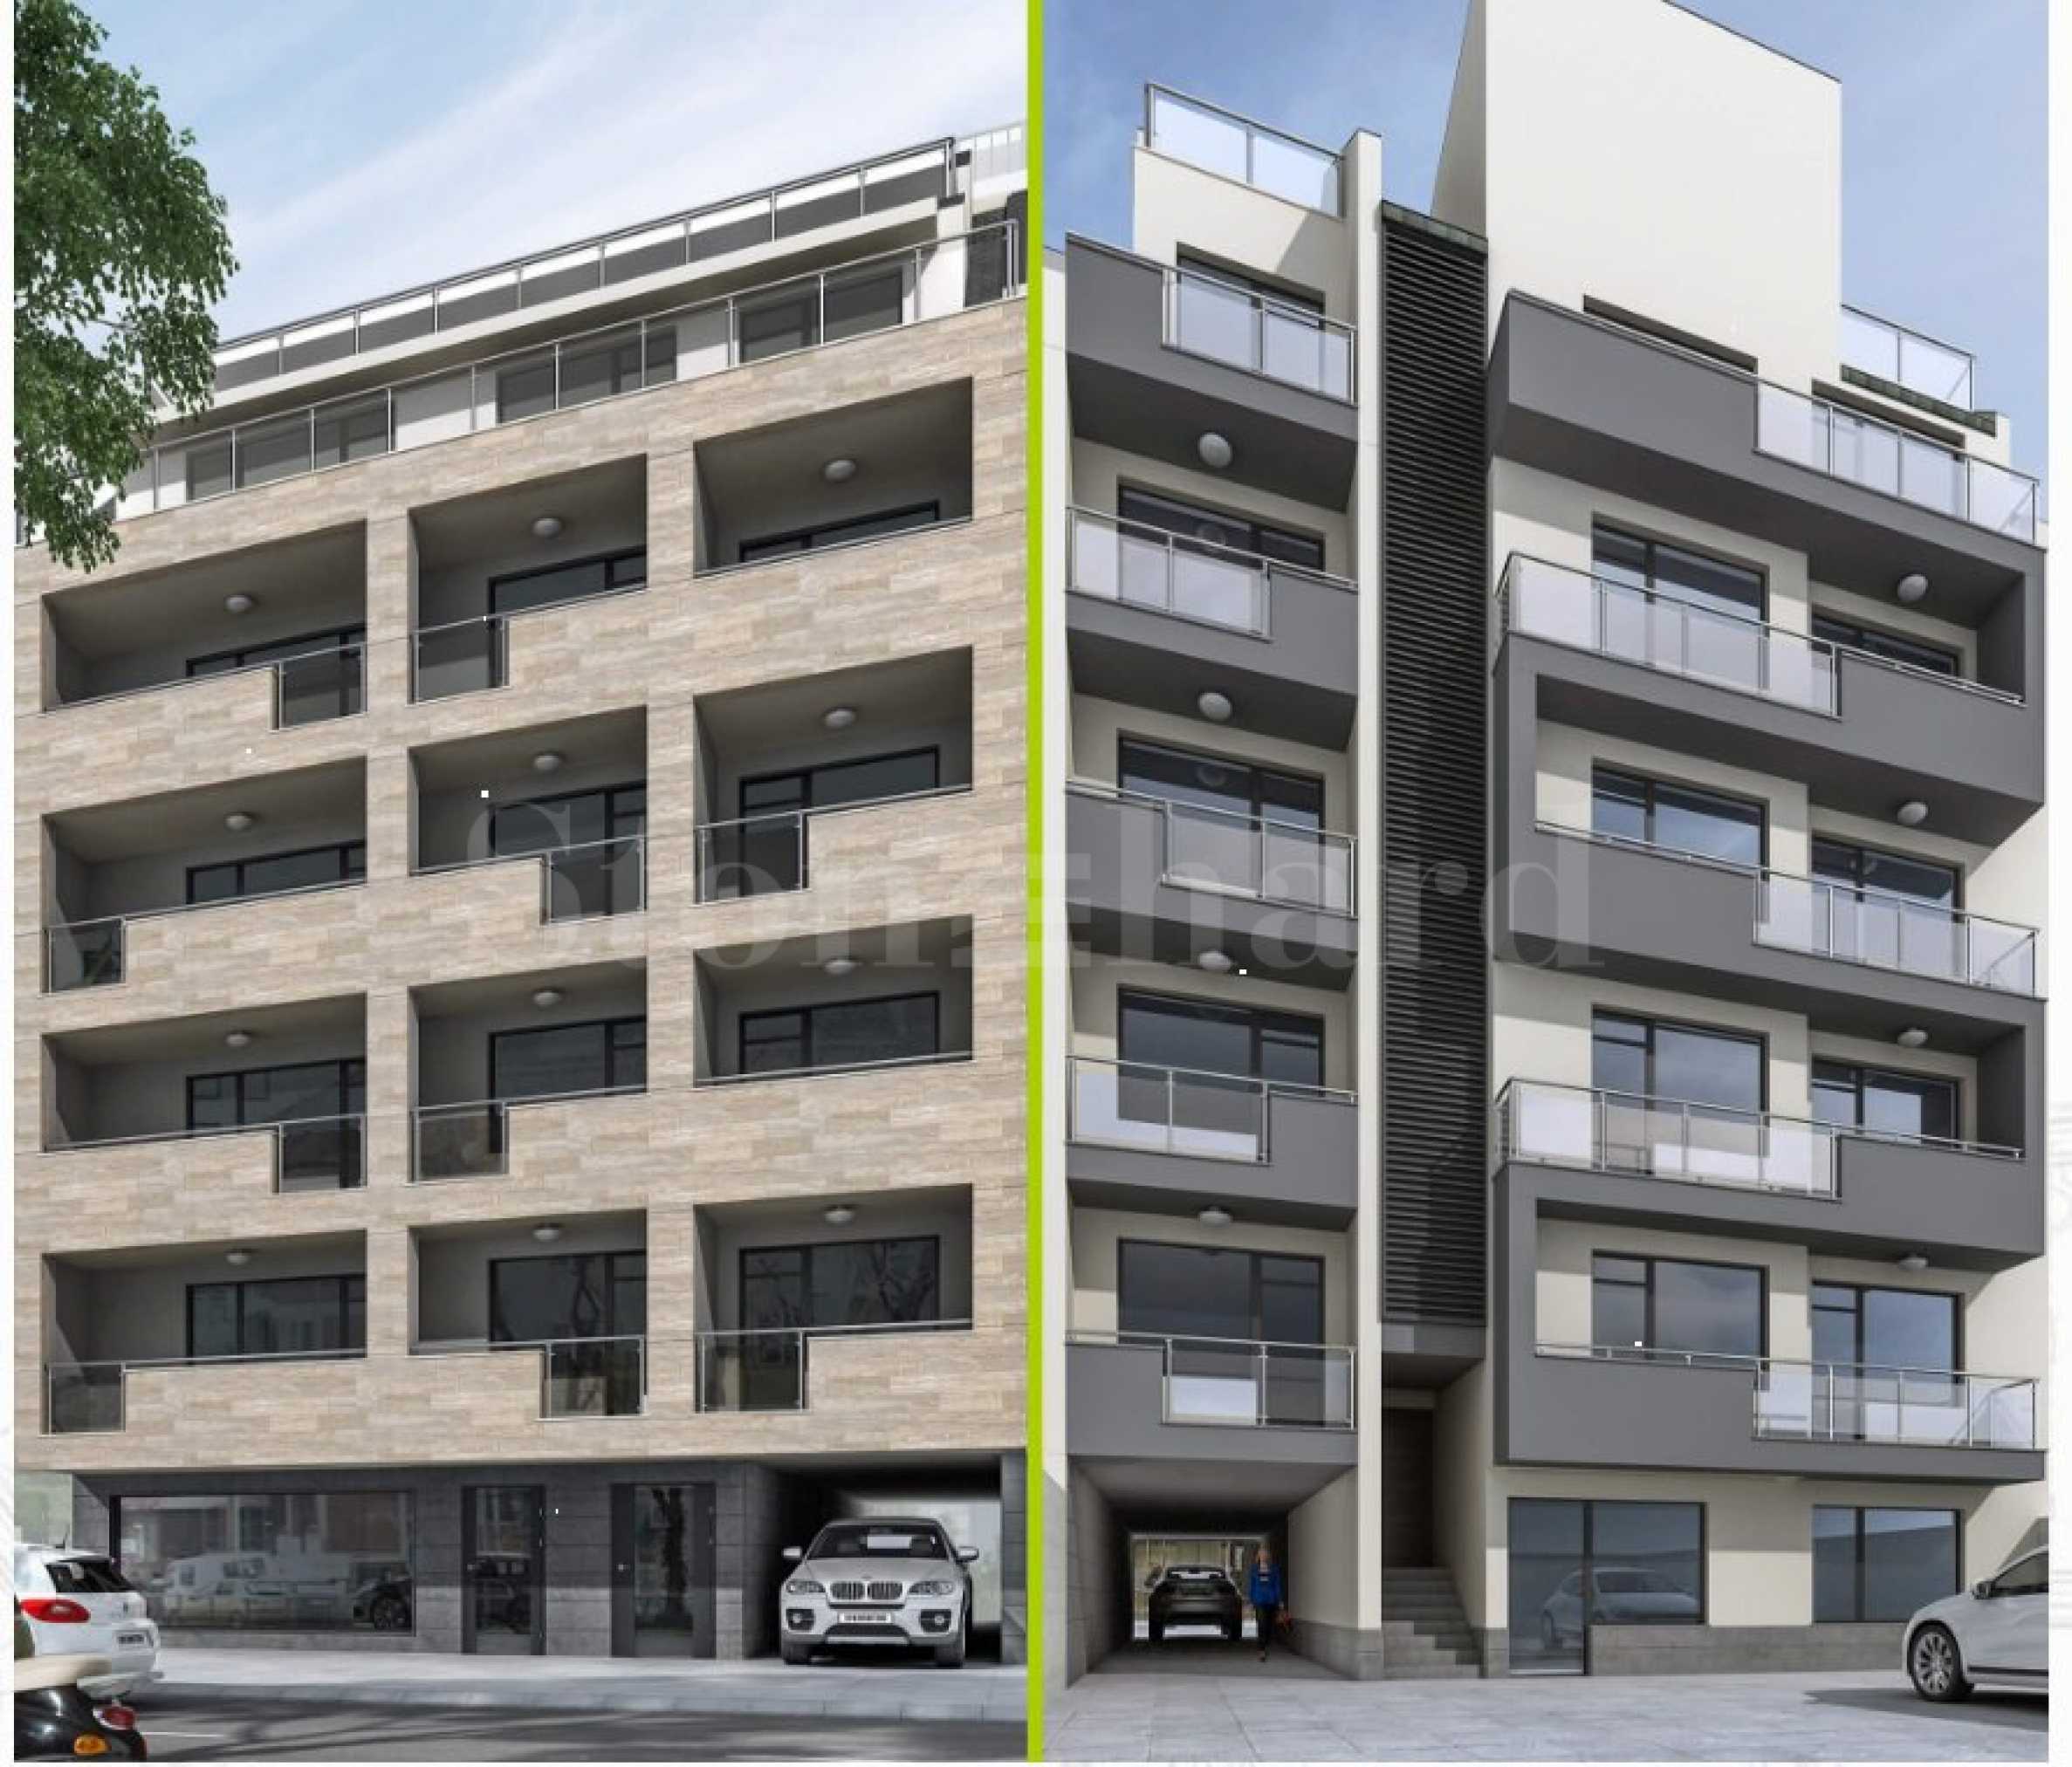 Functional apartments with garages in a preferred neighborhood1 - Stonehard